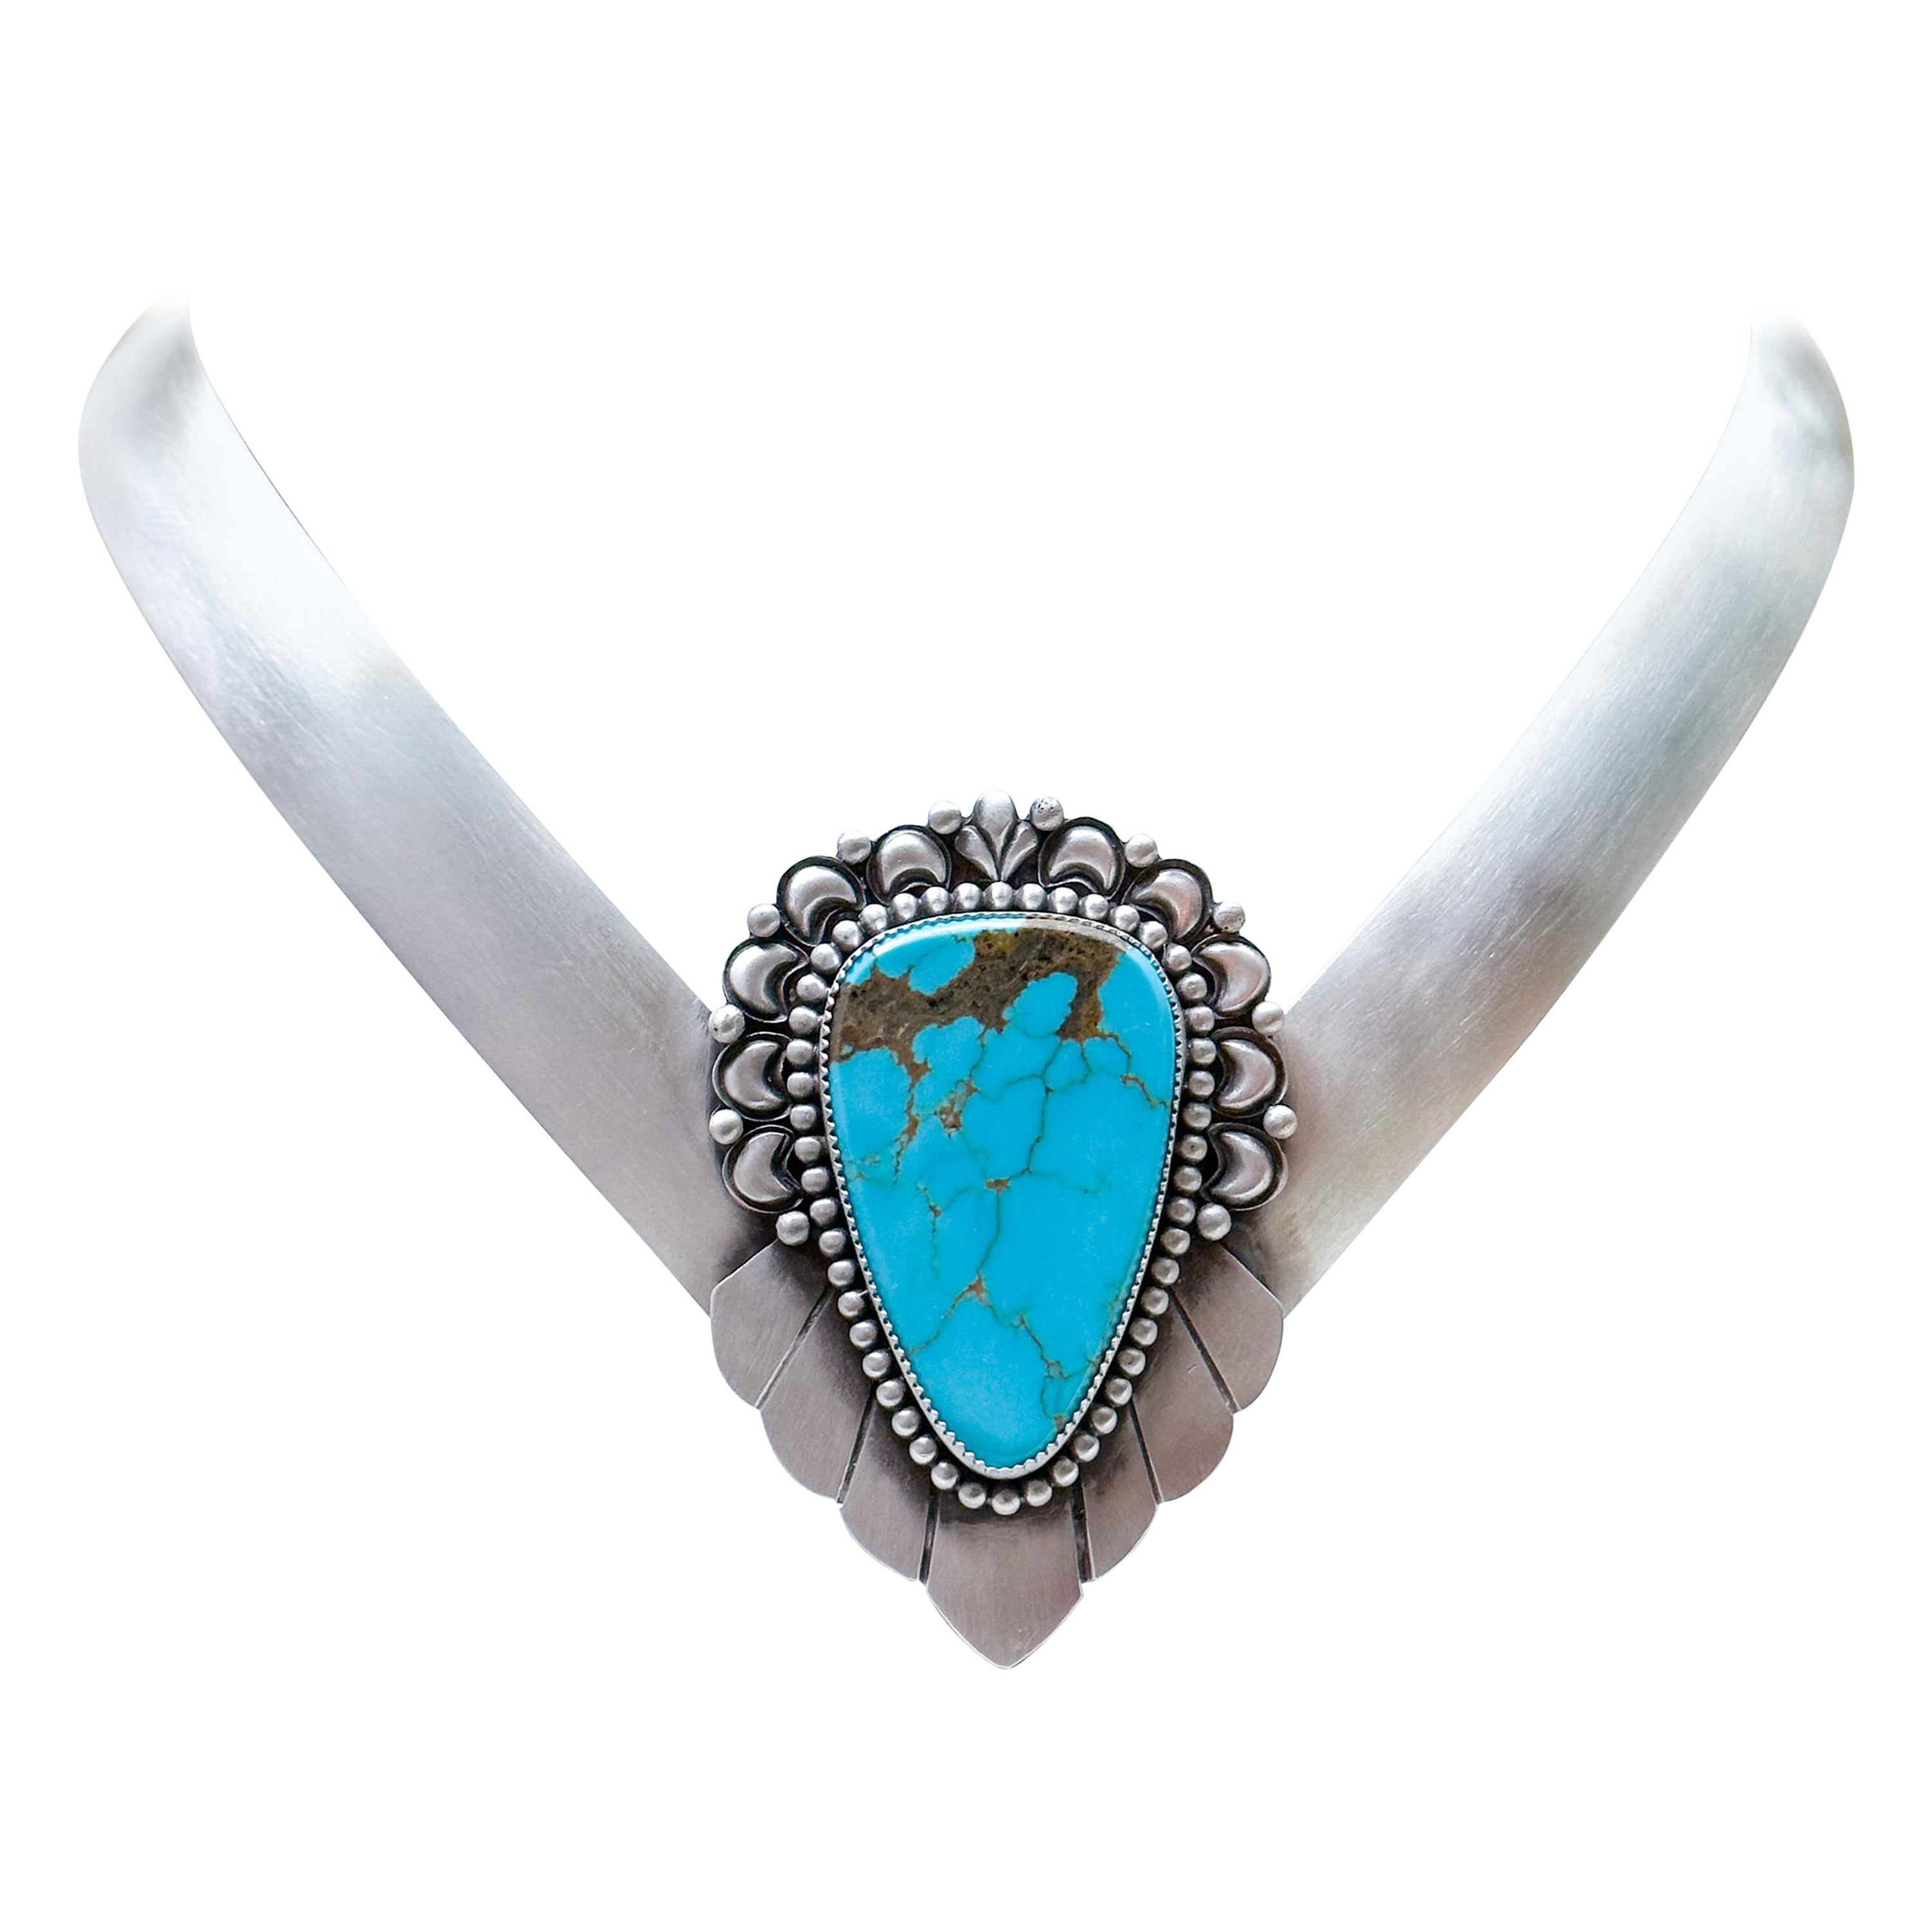 Silver Collar Statement Choker Necklace with Sonoran Turquoise For Sale